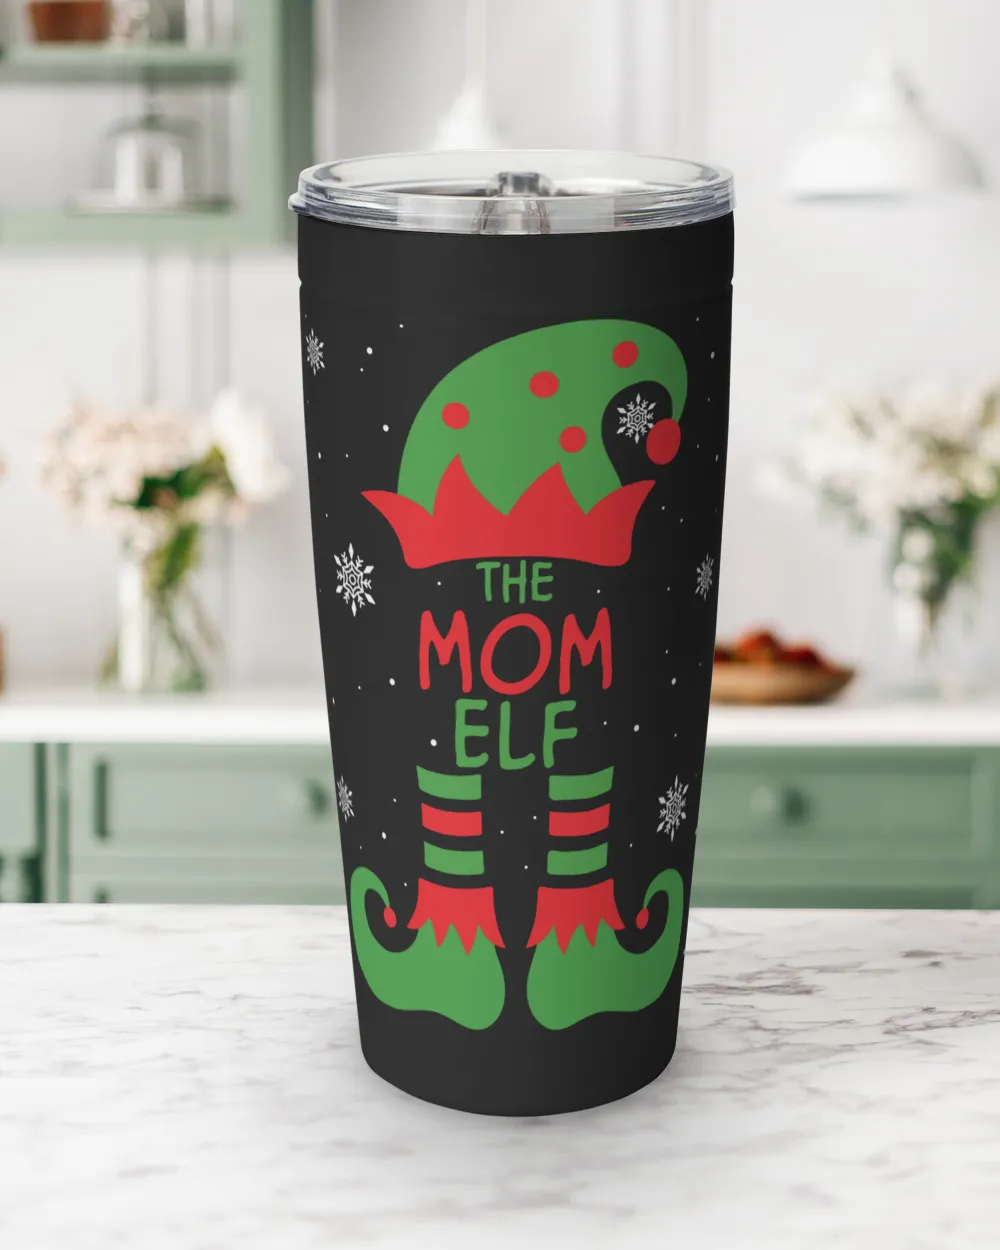 Mom Gifts Matching Family Funny Xmas The Mom ELF Christmas PJS Group